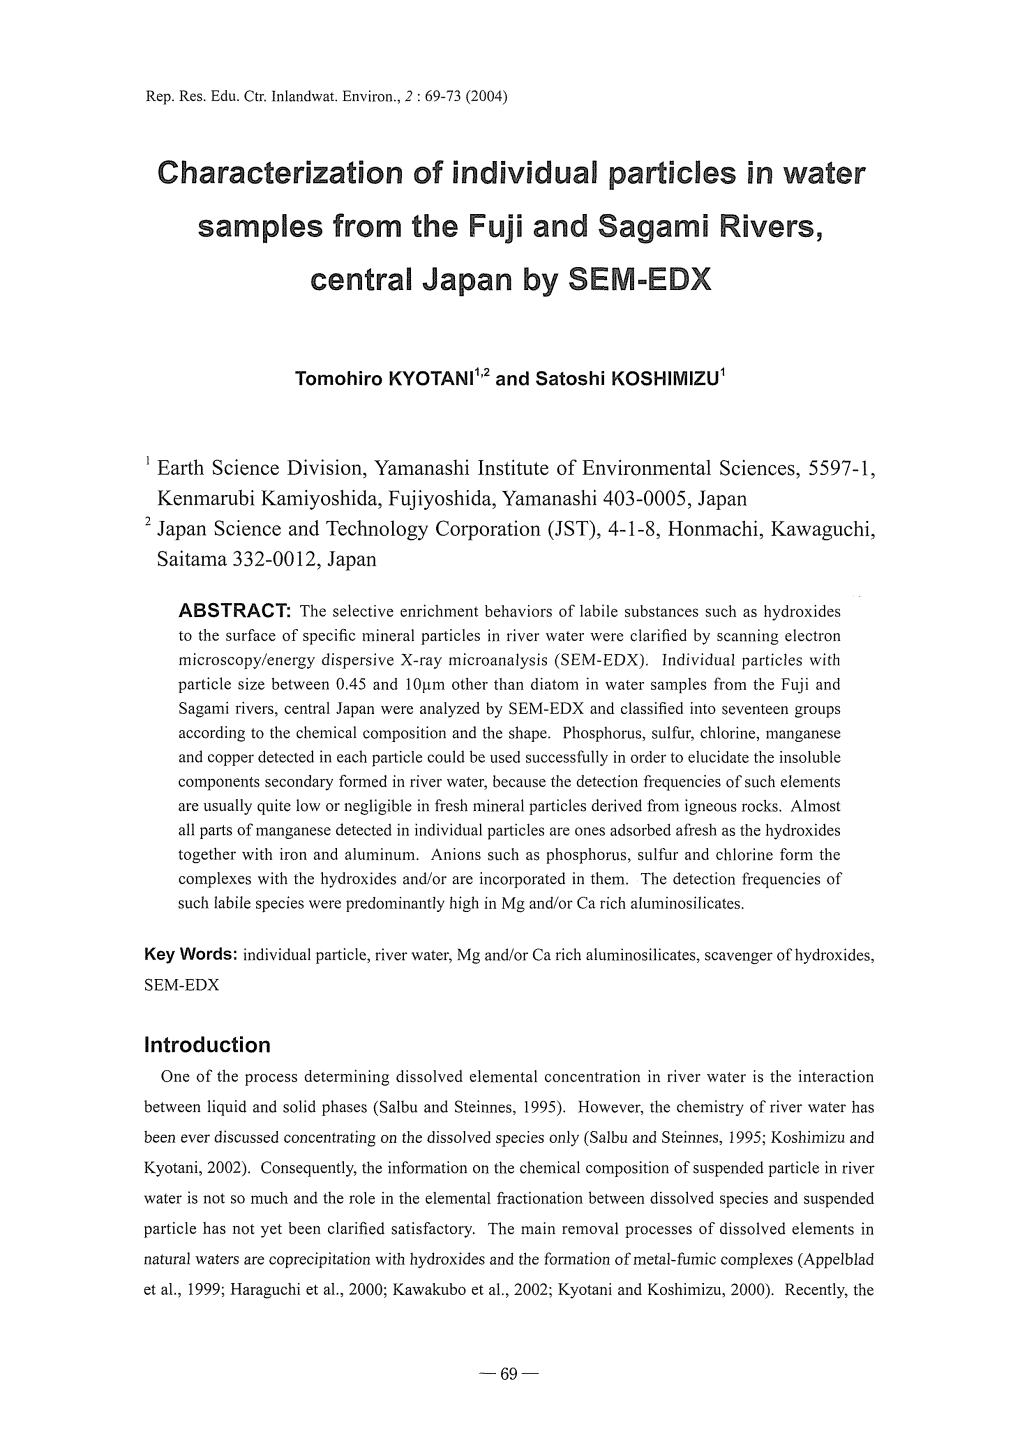 Characterization of Individual Particles in Water Samples from the Fuji And